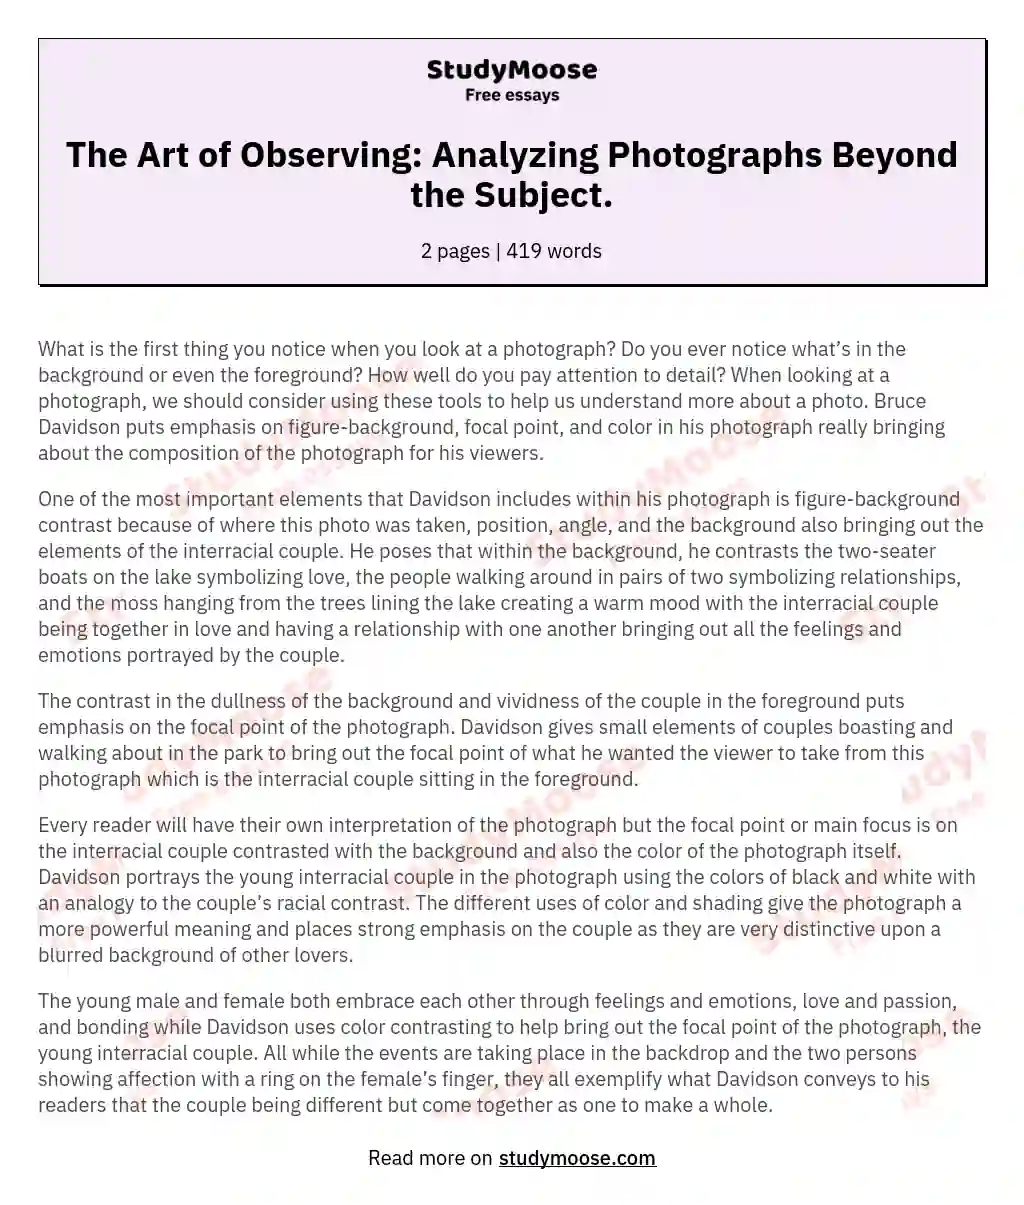 The Art of Observing: Analyzing Photographs Beyond the Subject. essay